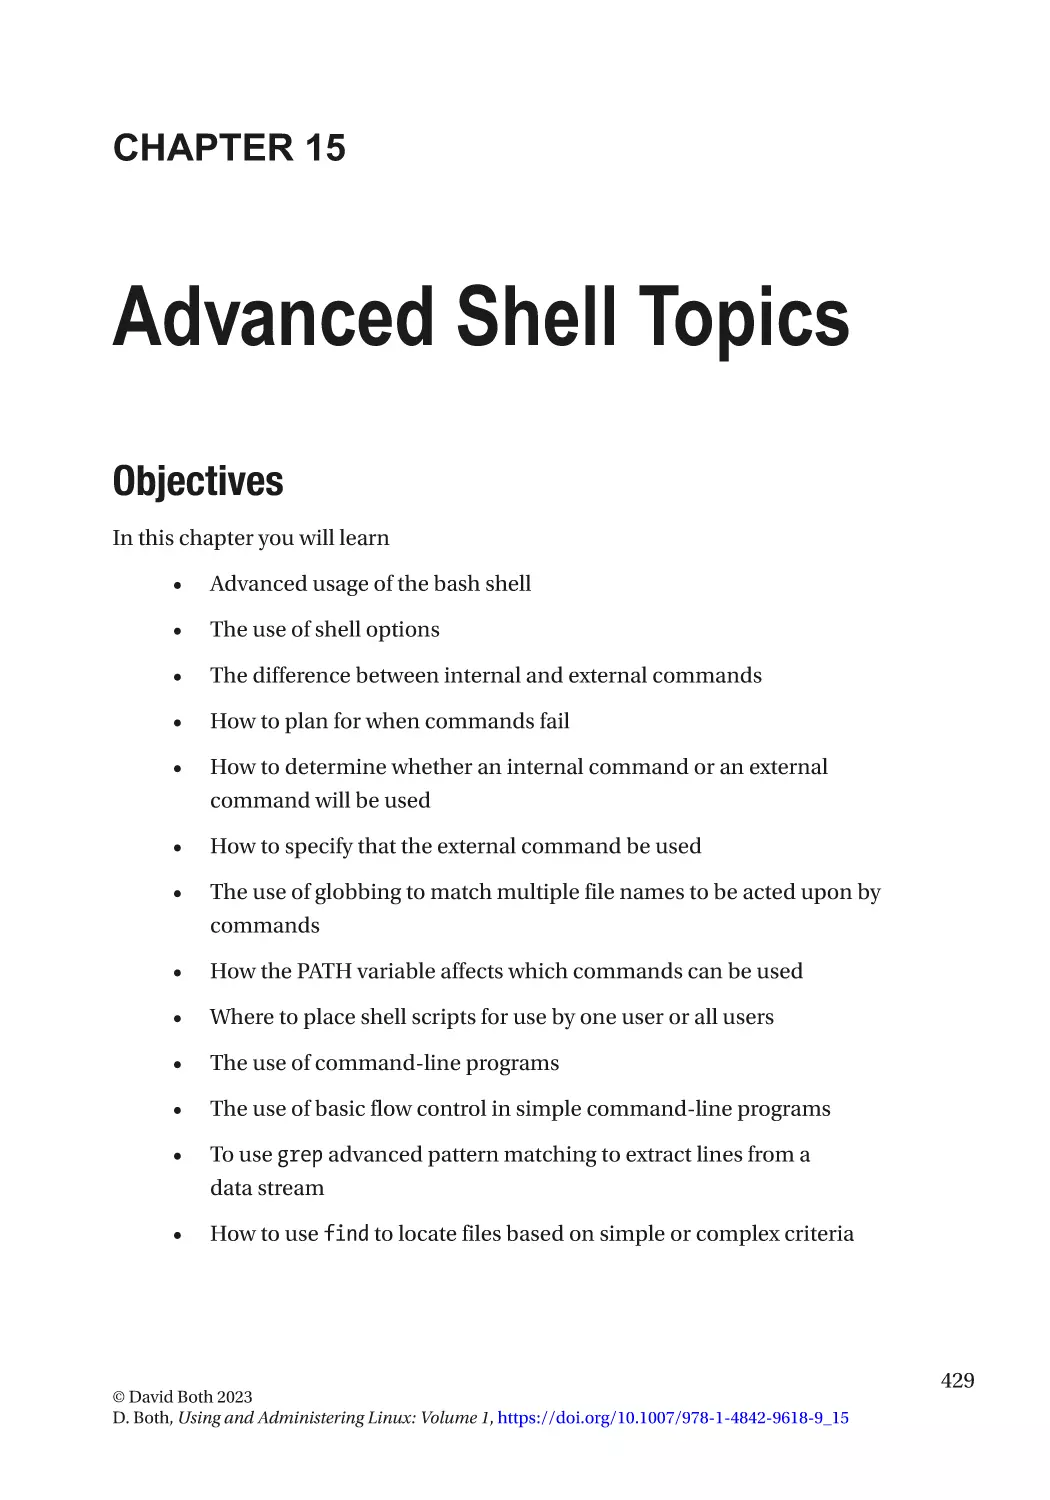 Chapter 15
Objectives